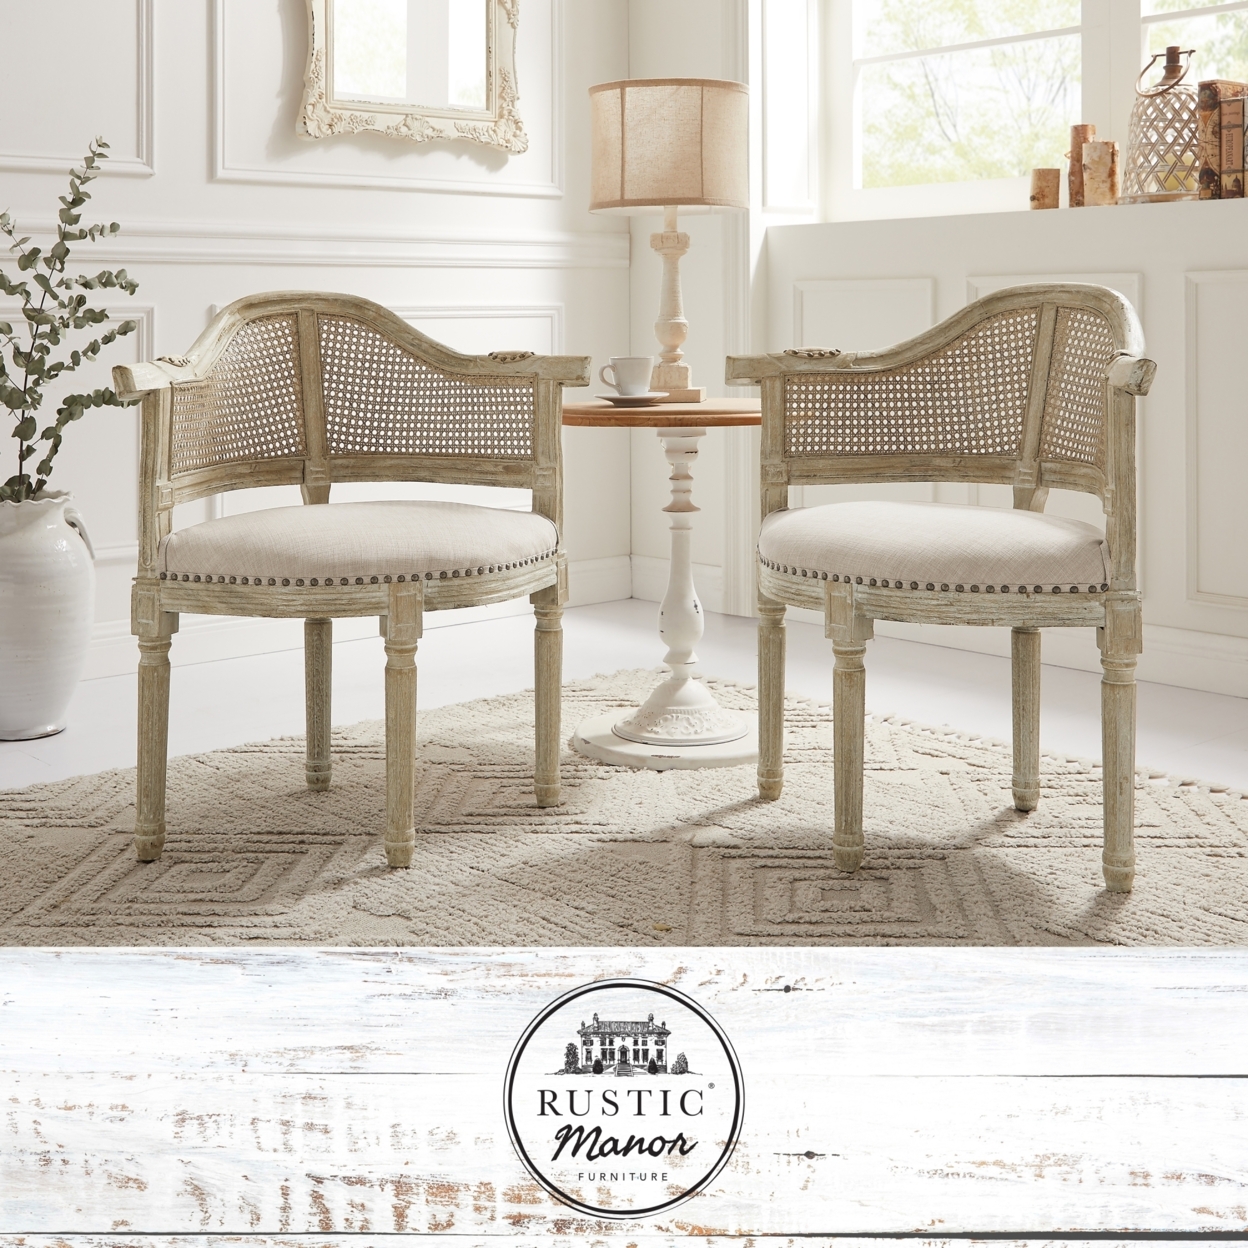 Arius Accent Chair - Upholstered, Nailhead Trim , Rattan Imitation, Curved Back , Antique Brushed Wood Finish - Cream White